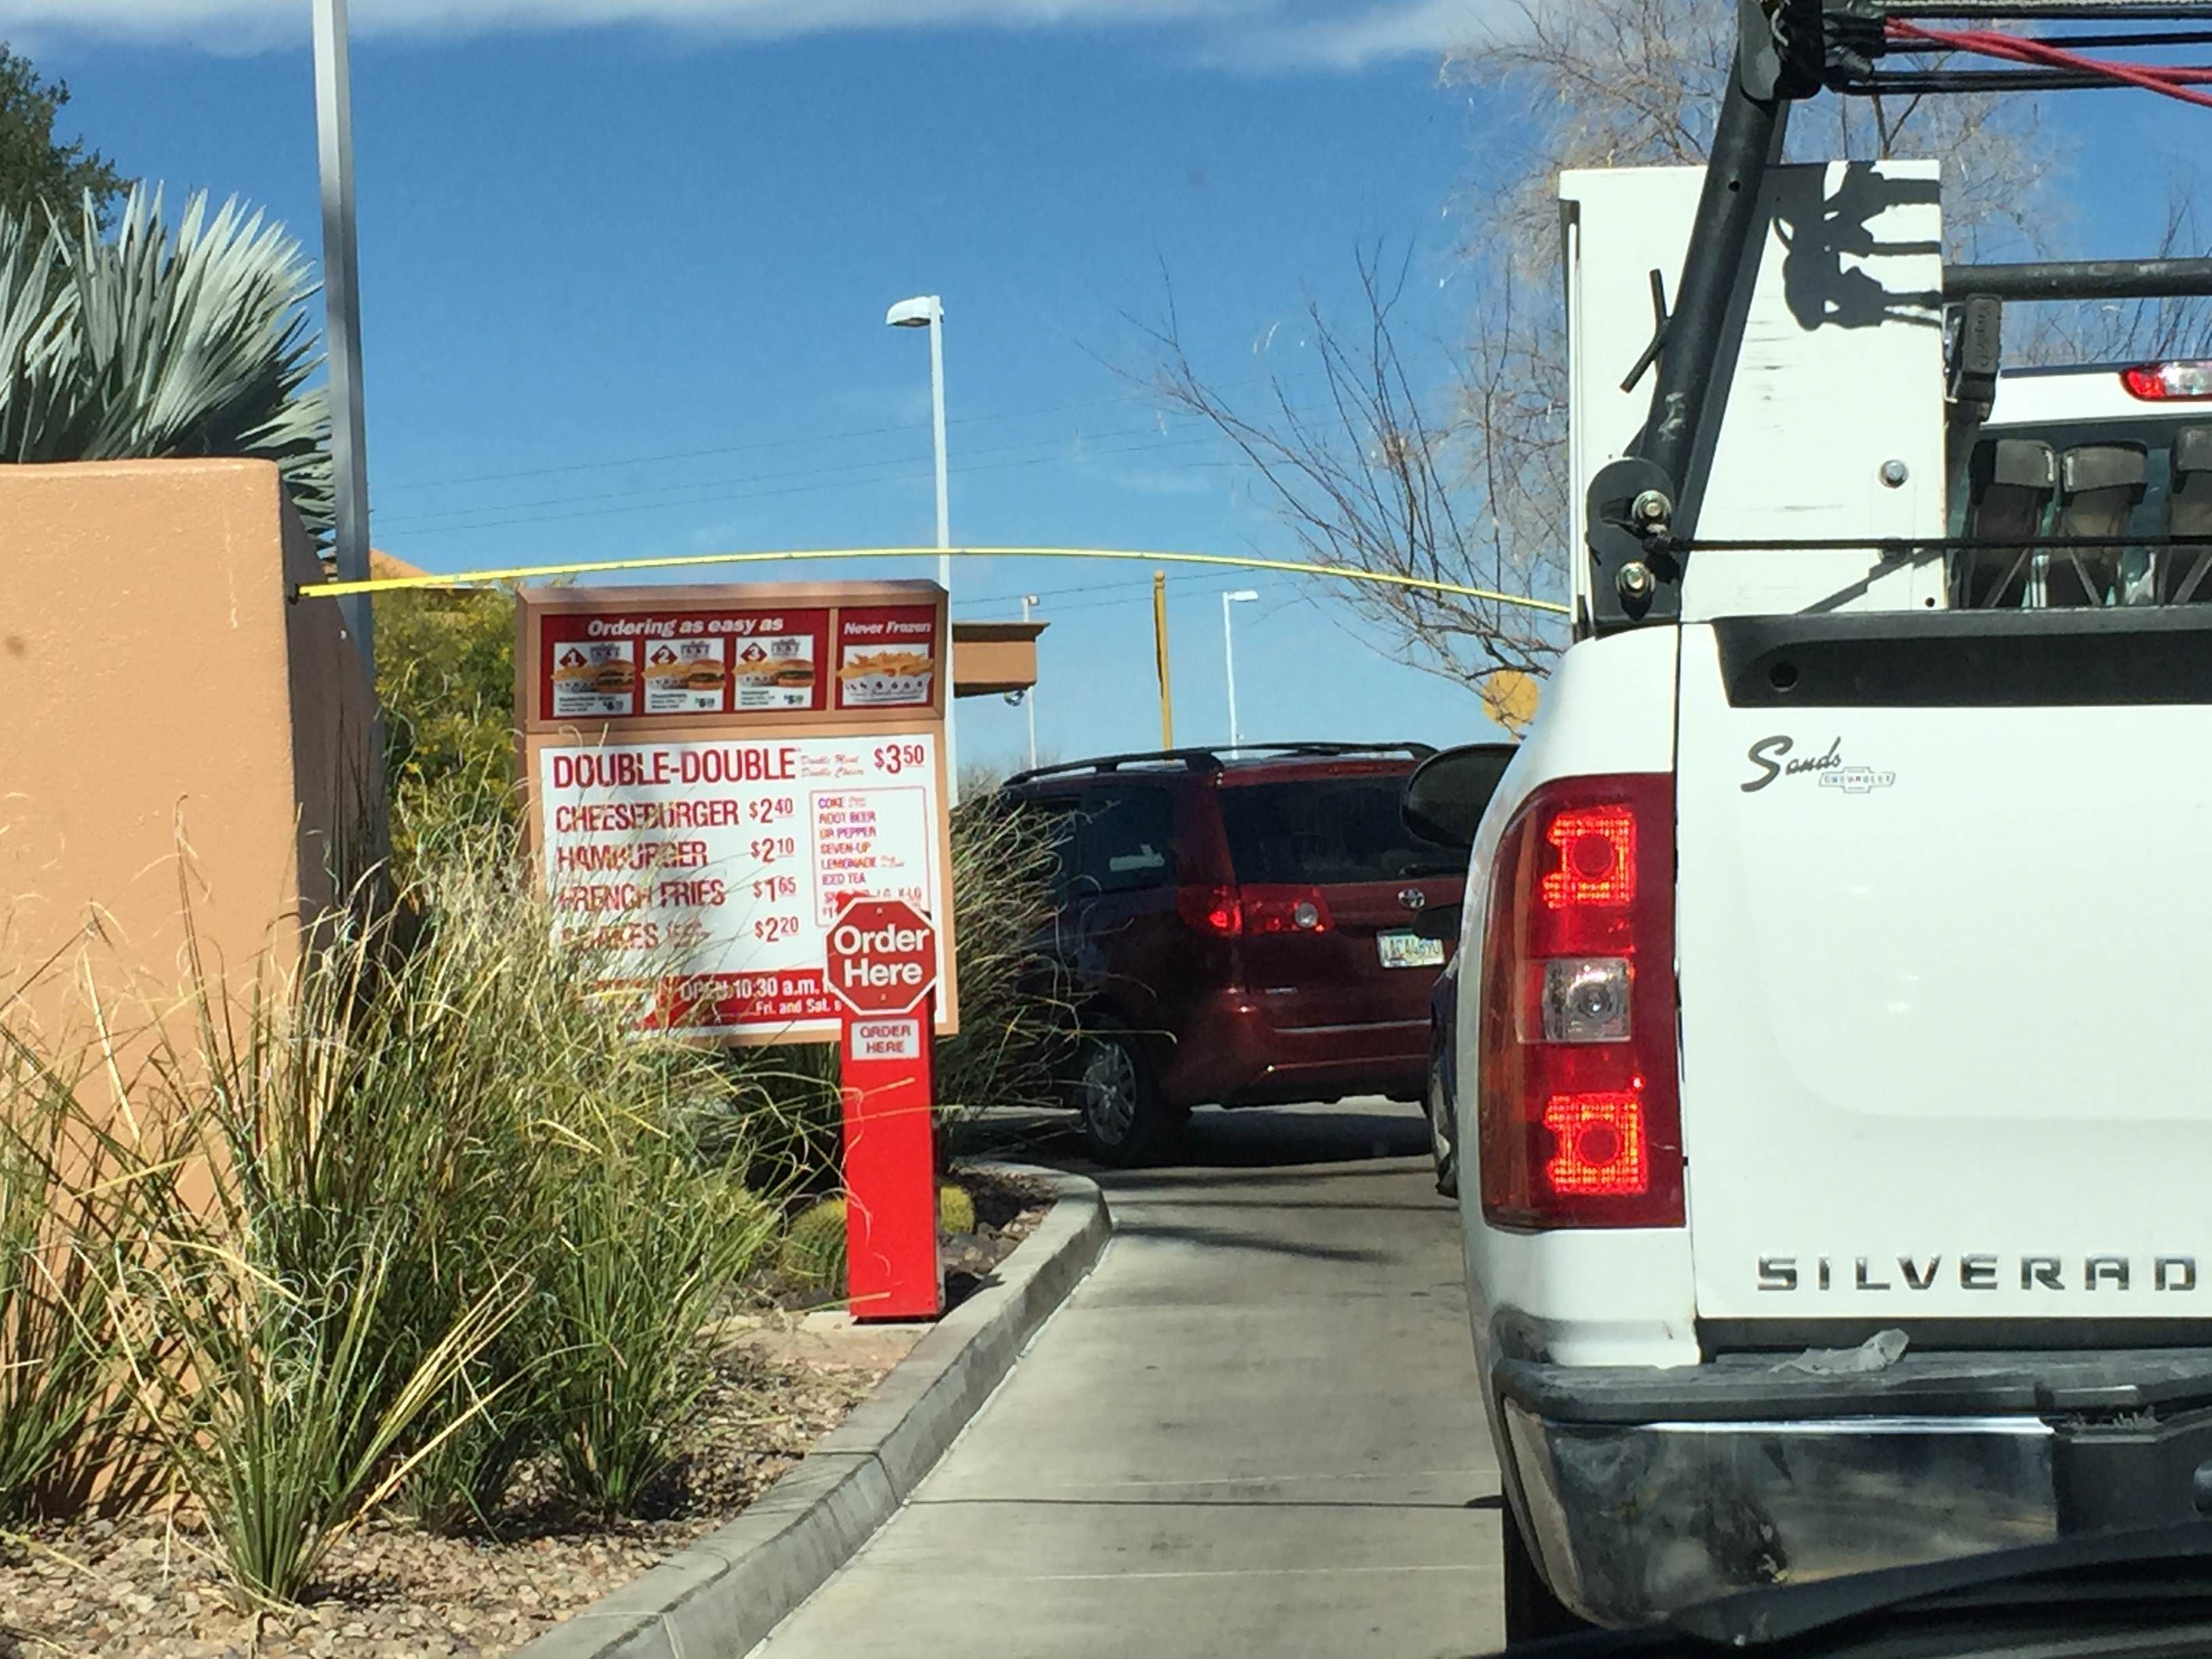 Bored in line at In-N-Out, these construction workers tried to see what they could reach with their measuring tape.